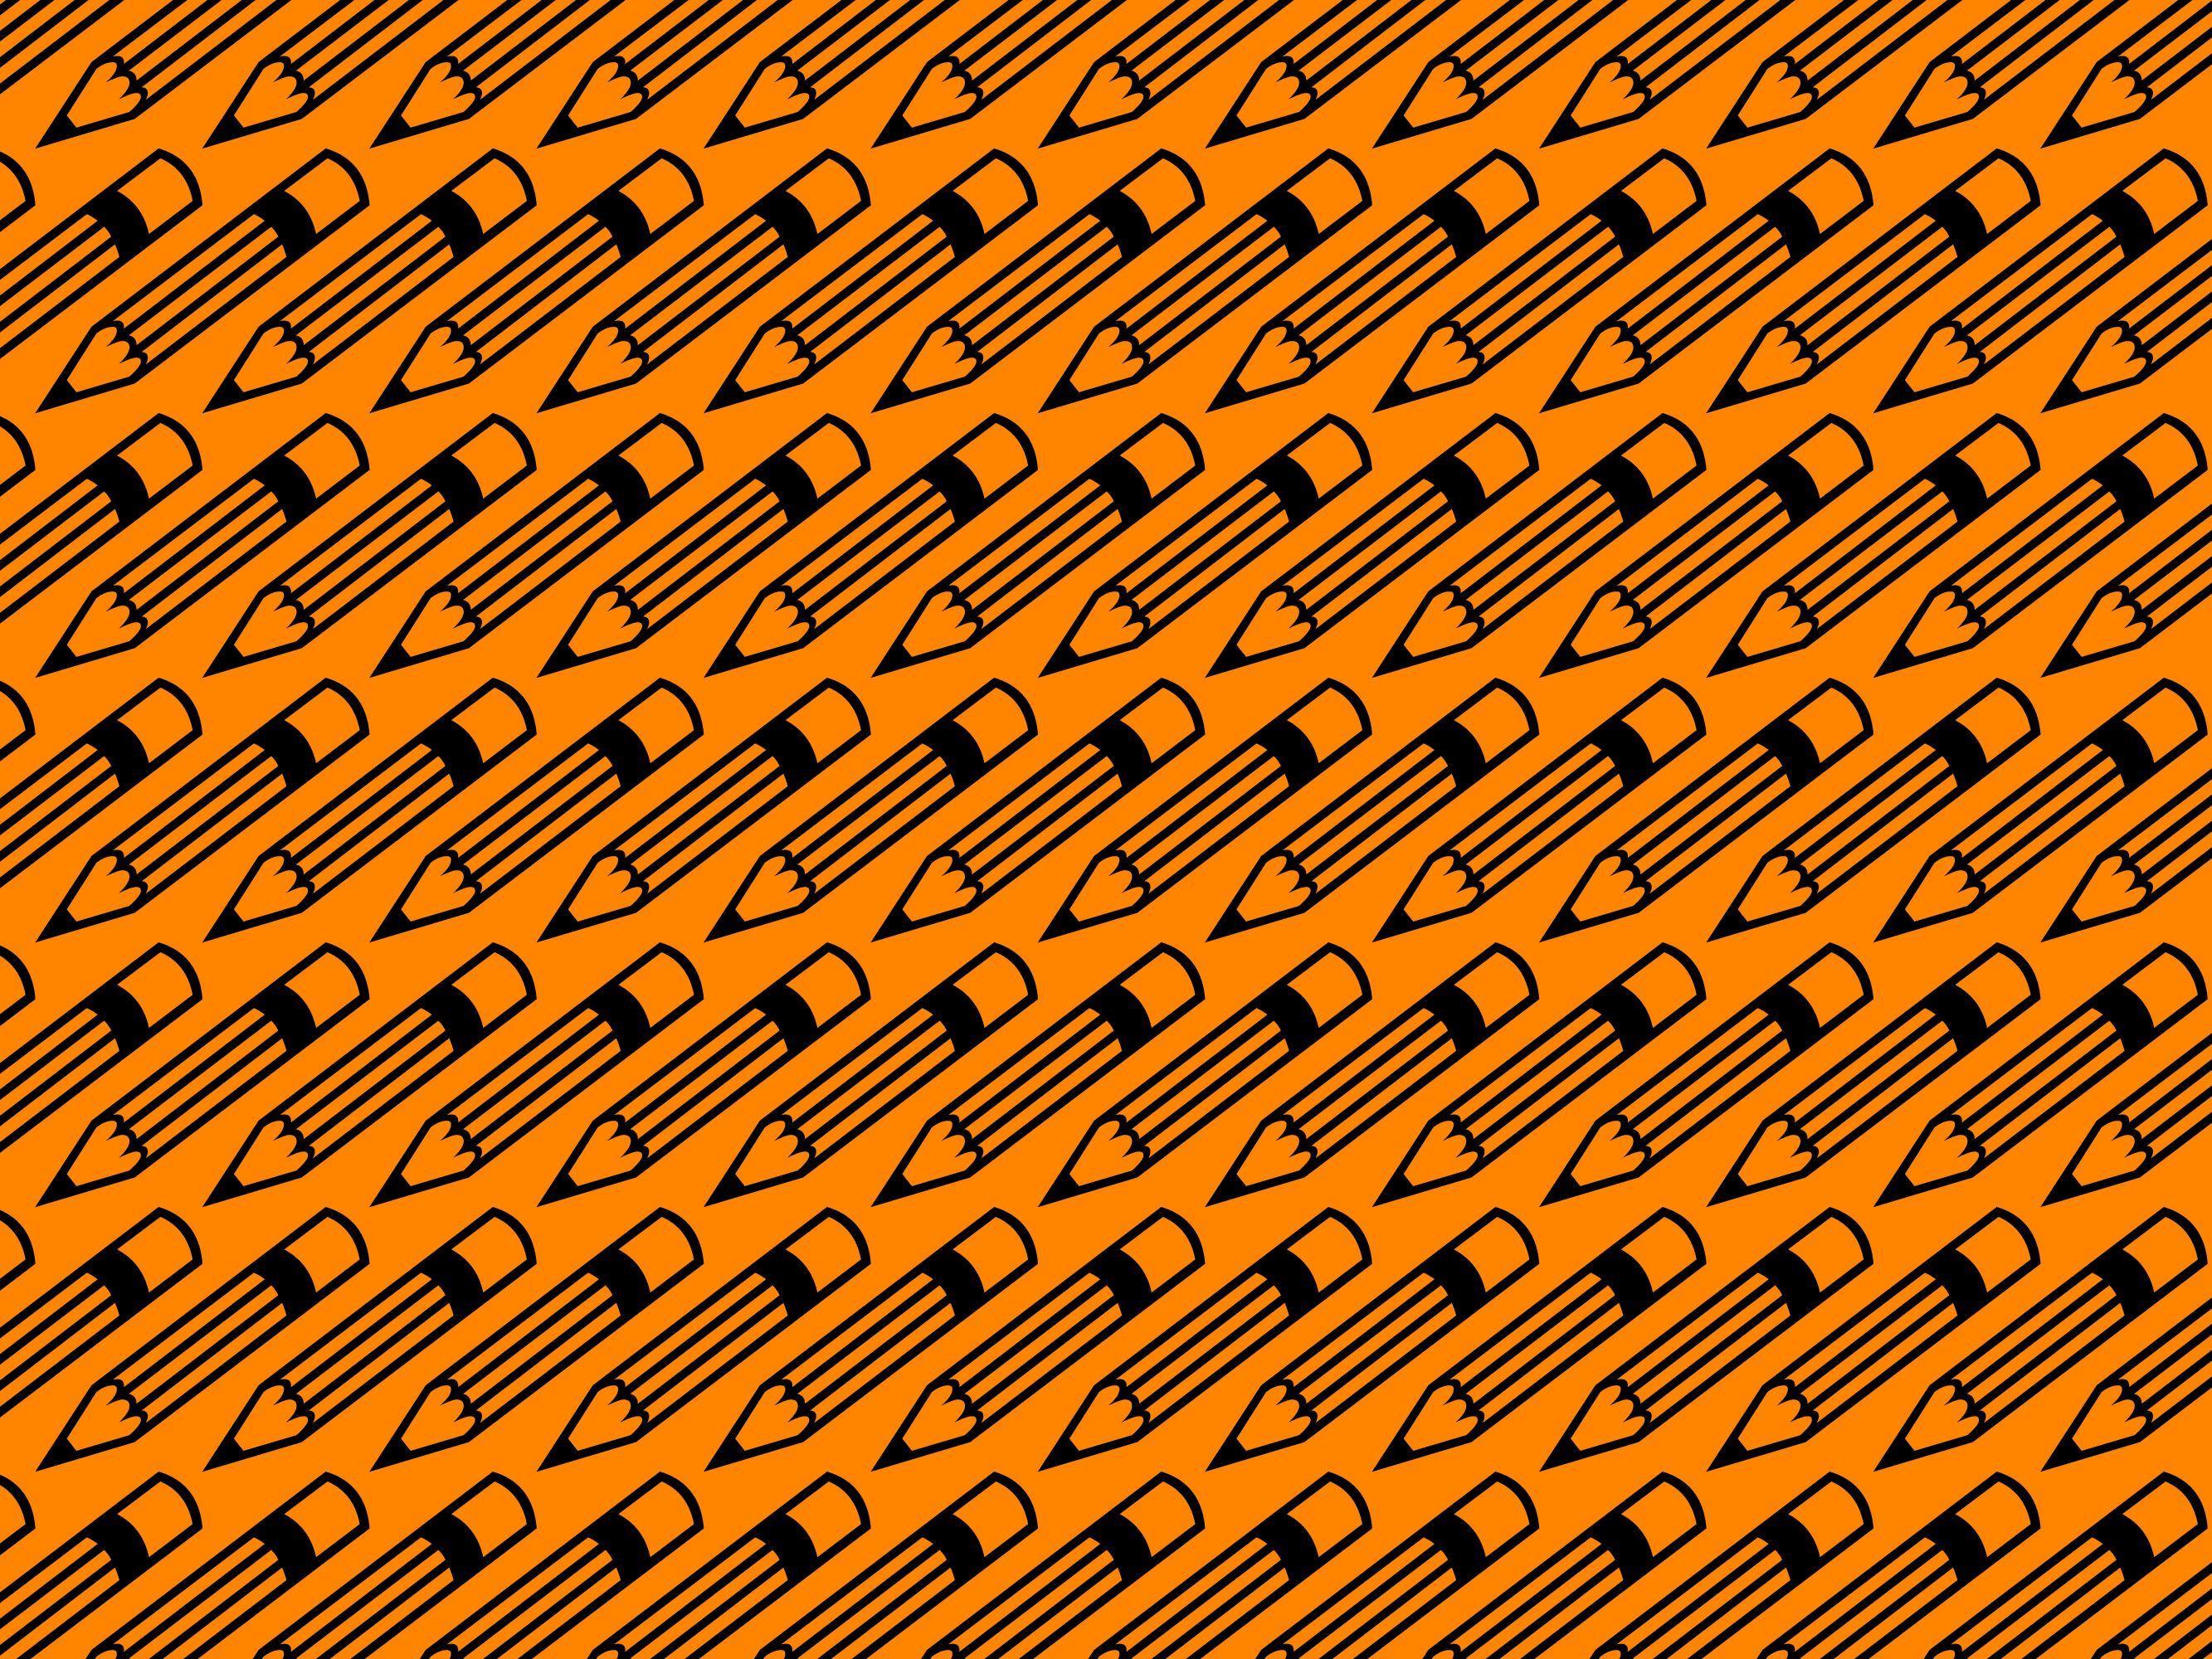 An orange graphic filled with pencil symbols.